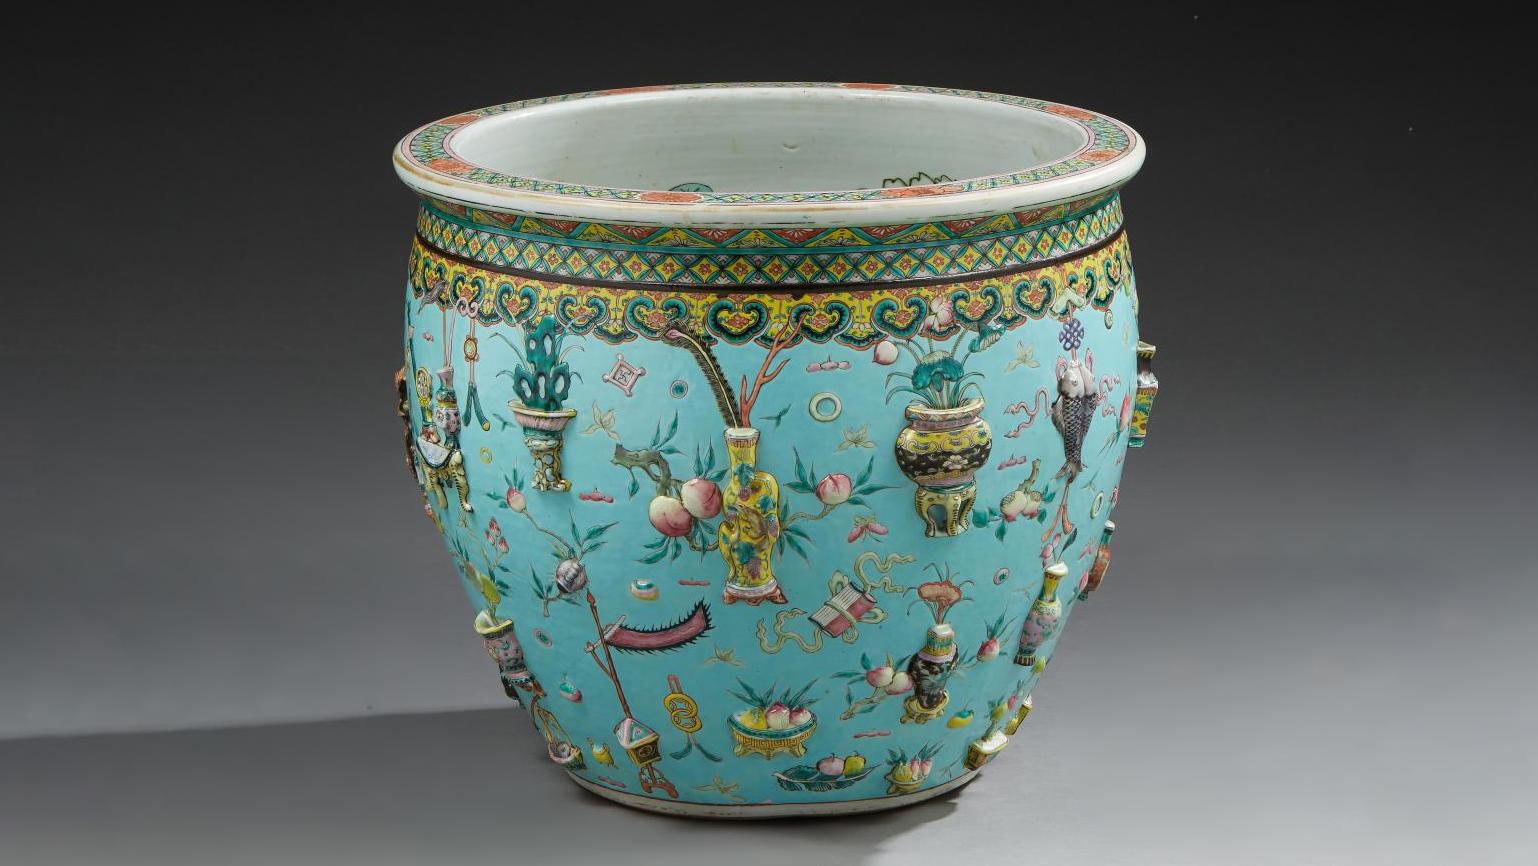 €15,937China, second half of 19th century. Porcelain aquarium decorated with precious... Art Price Index: Handsome Chinese Fishbowls in Porcelain